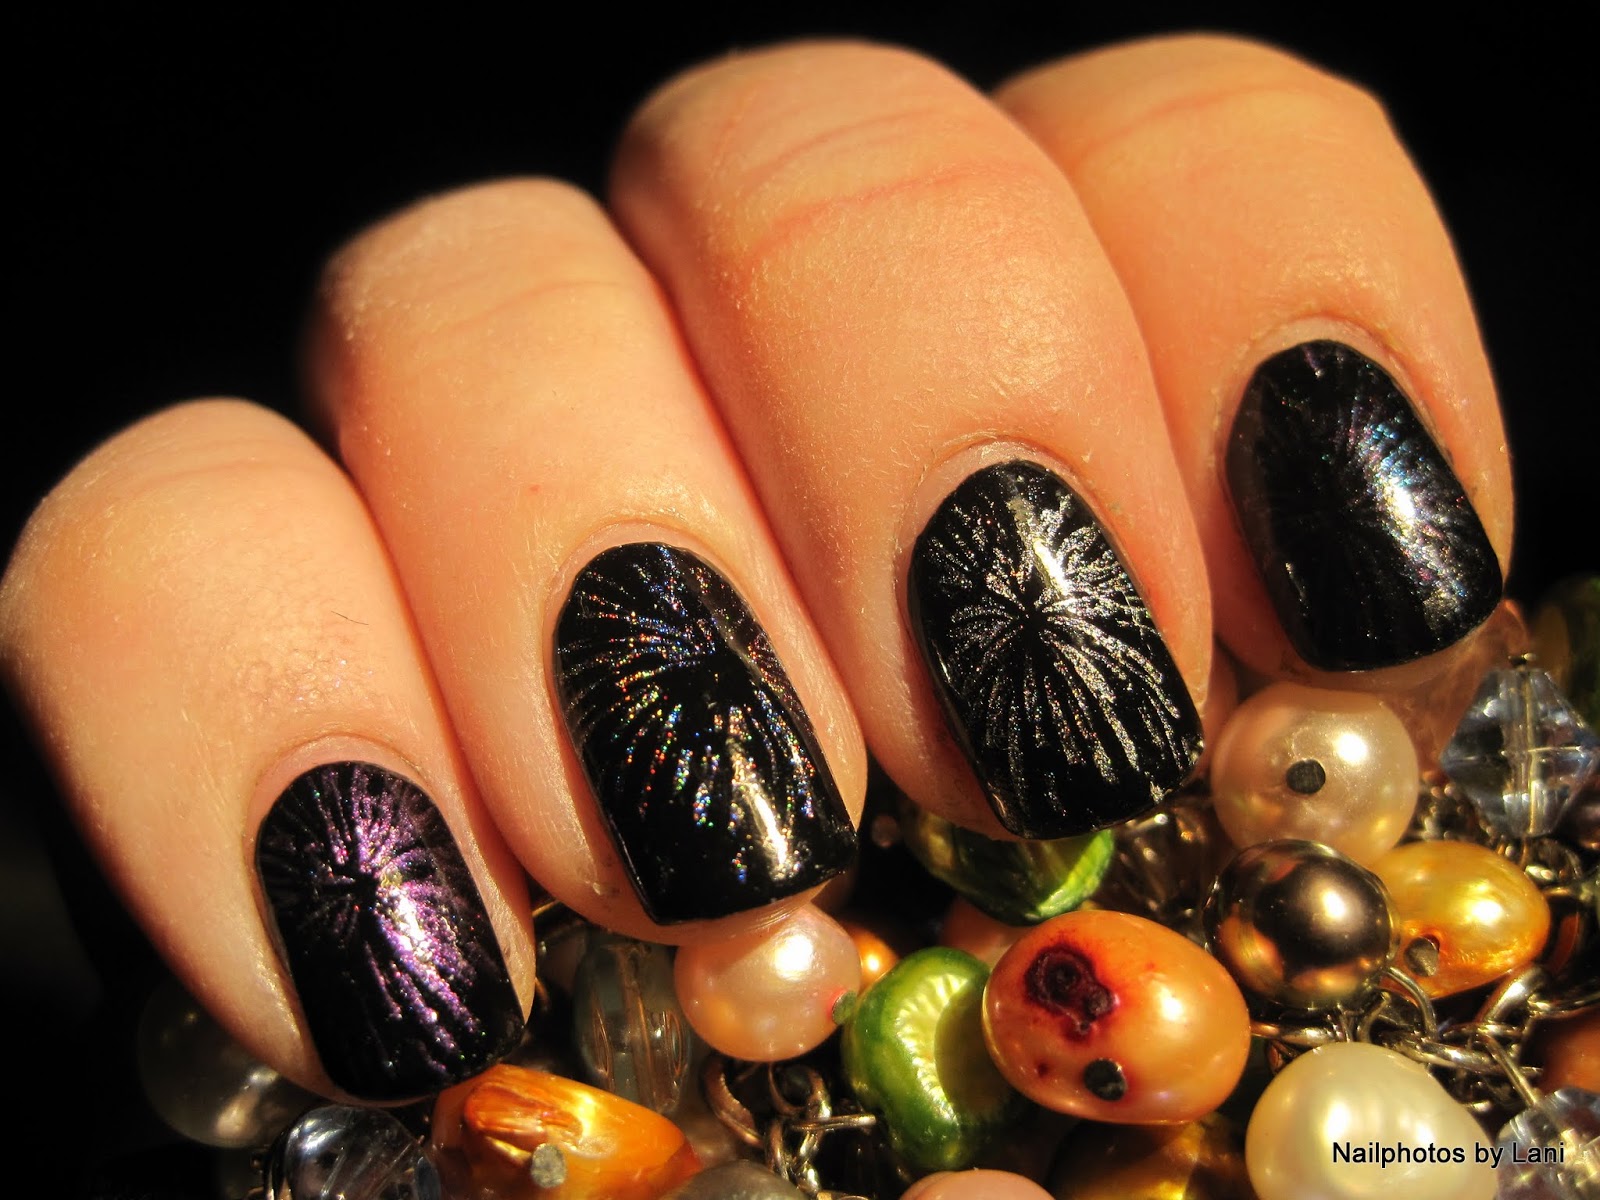 10. "New Year's Eve Nail Designs" - wide 10